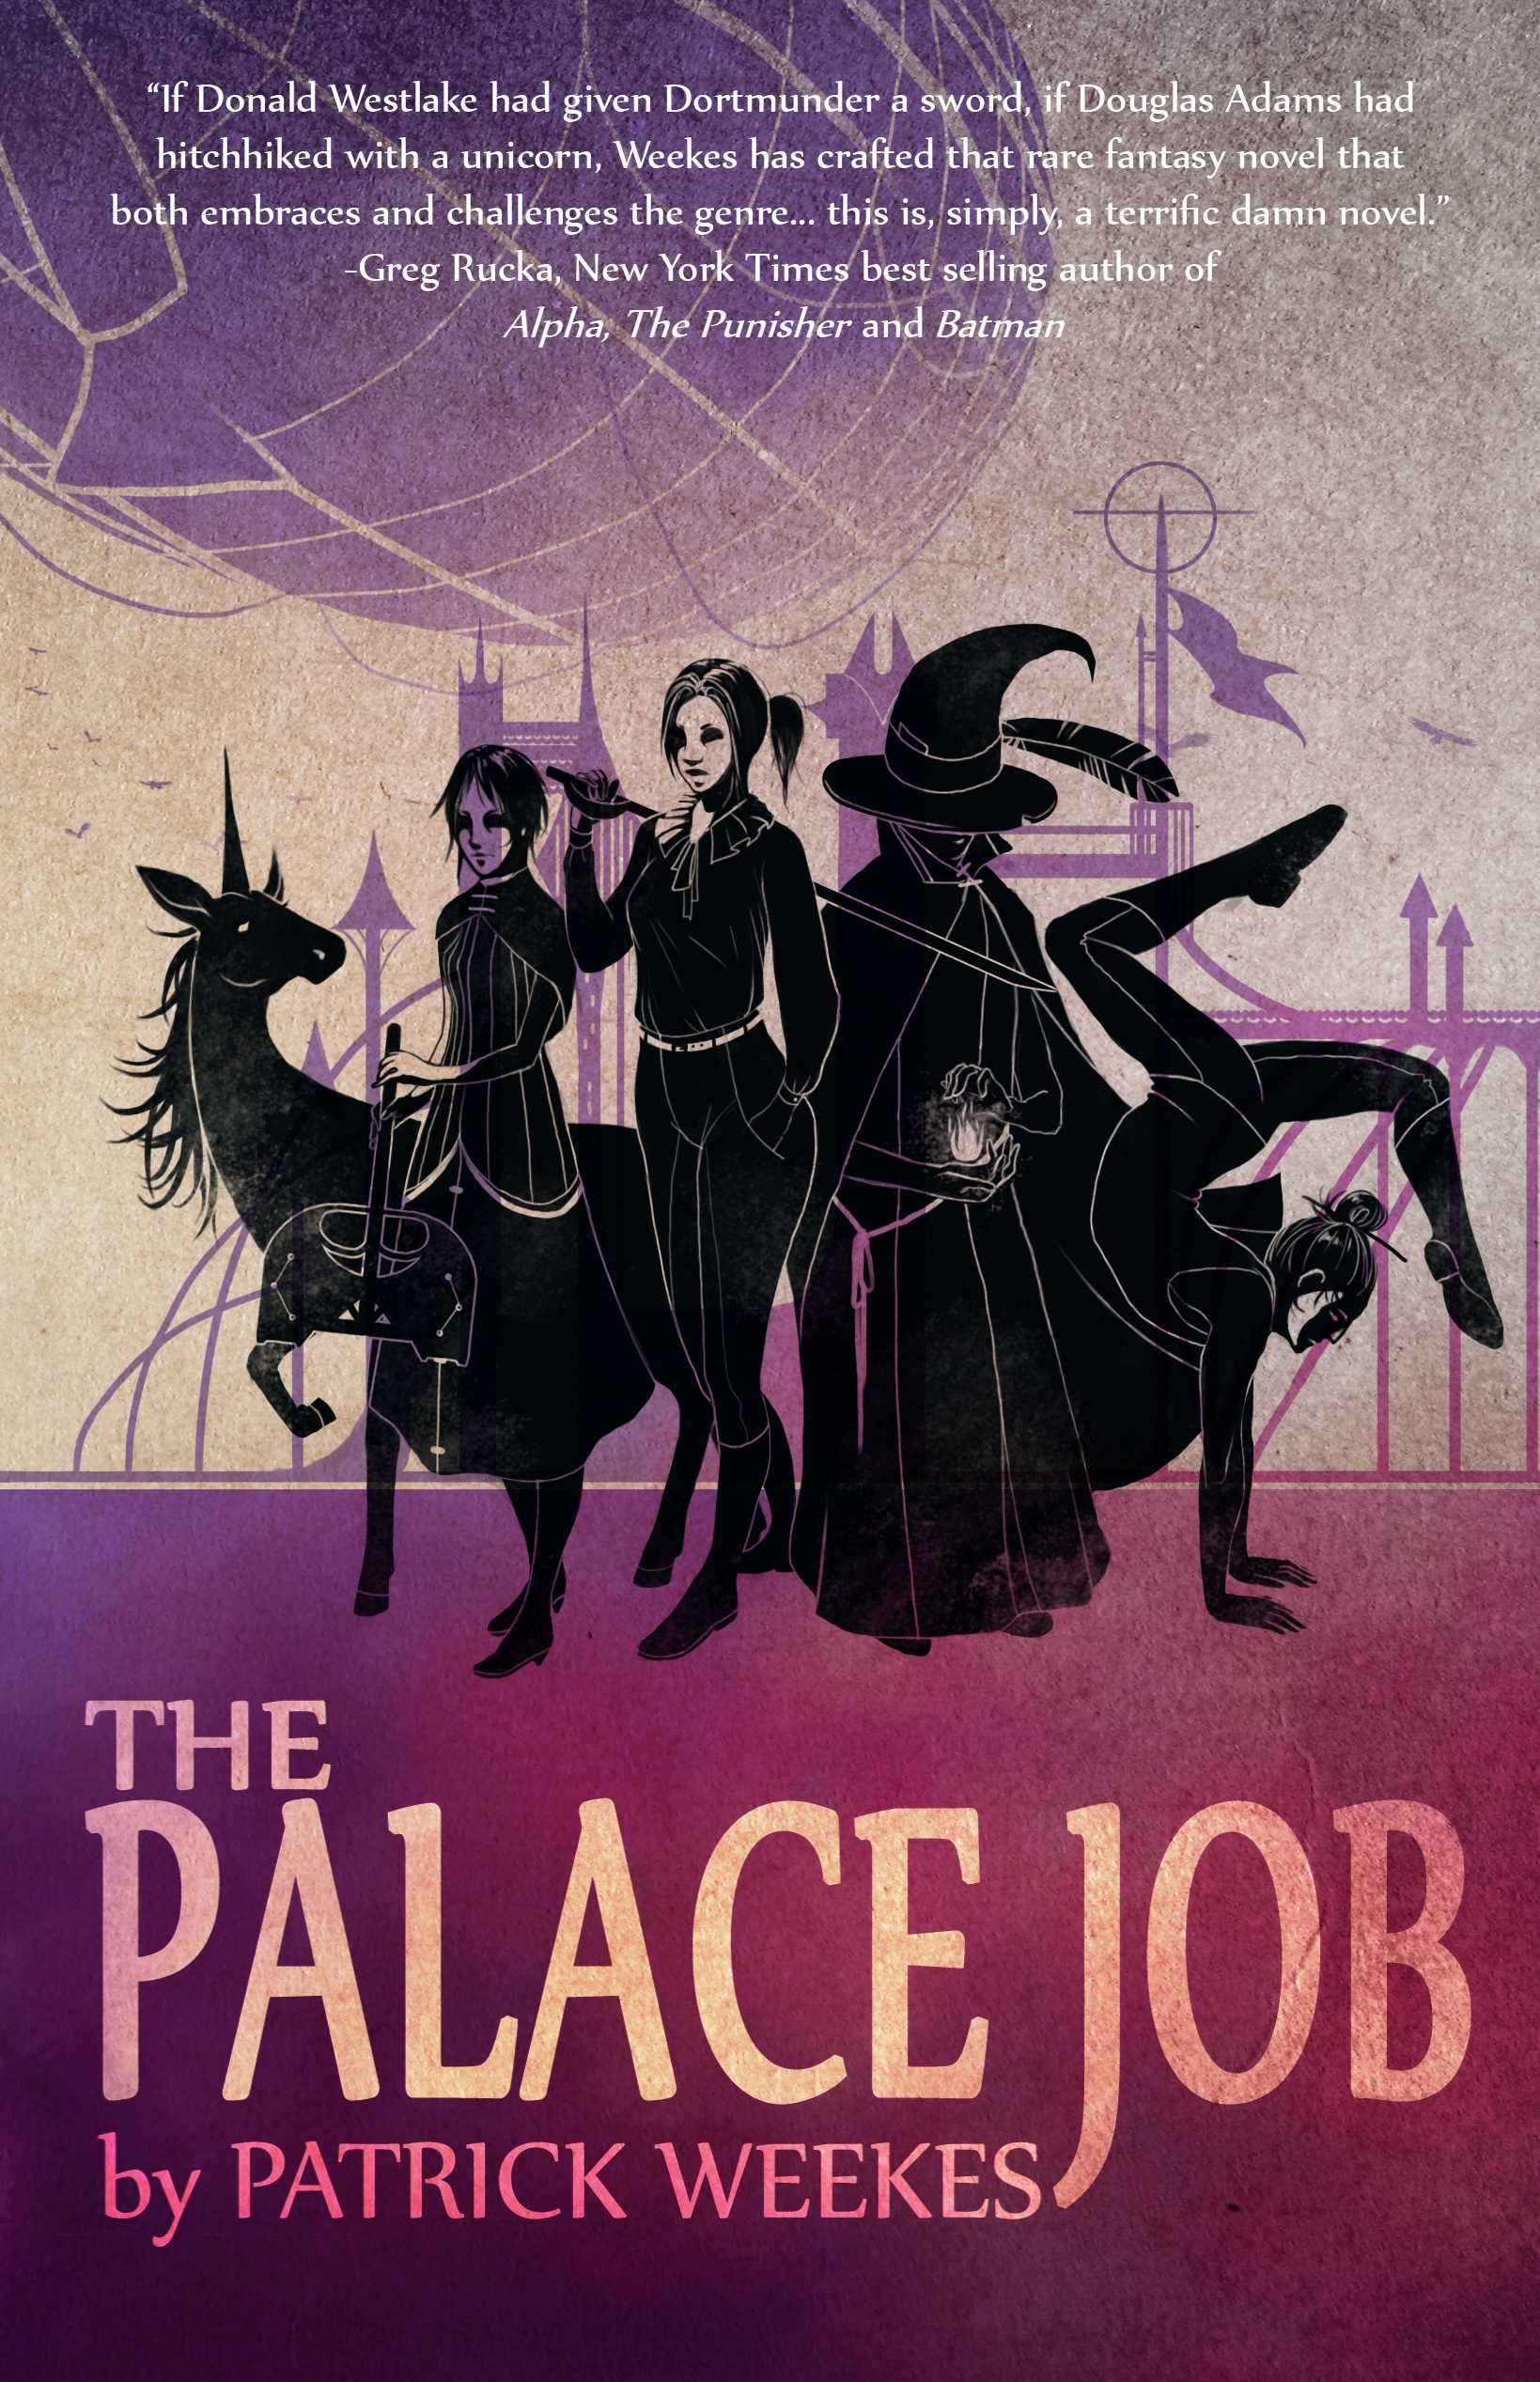 The Palace Job: The Nerd Appropriate Review & A CONTEST!